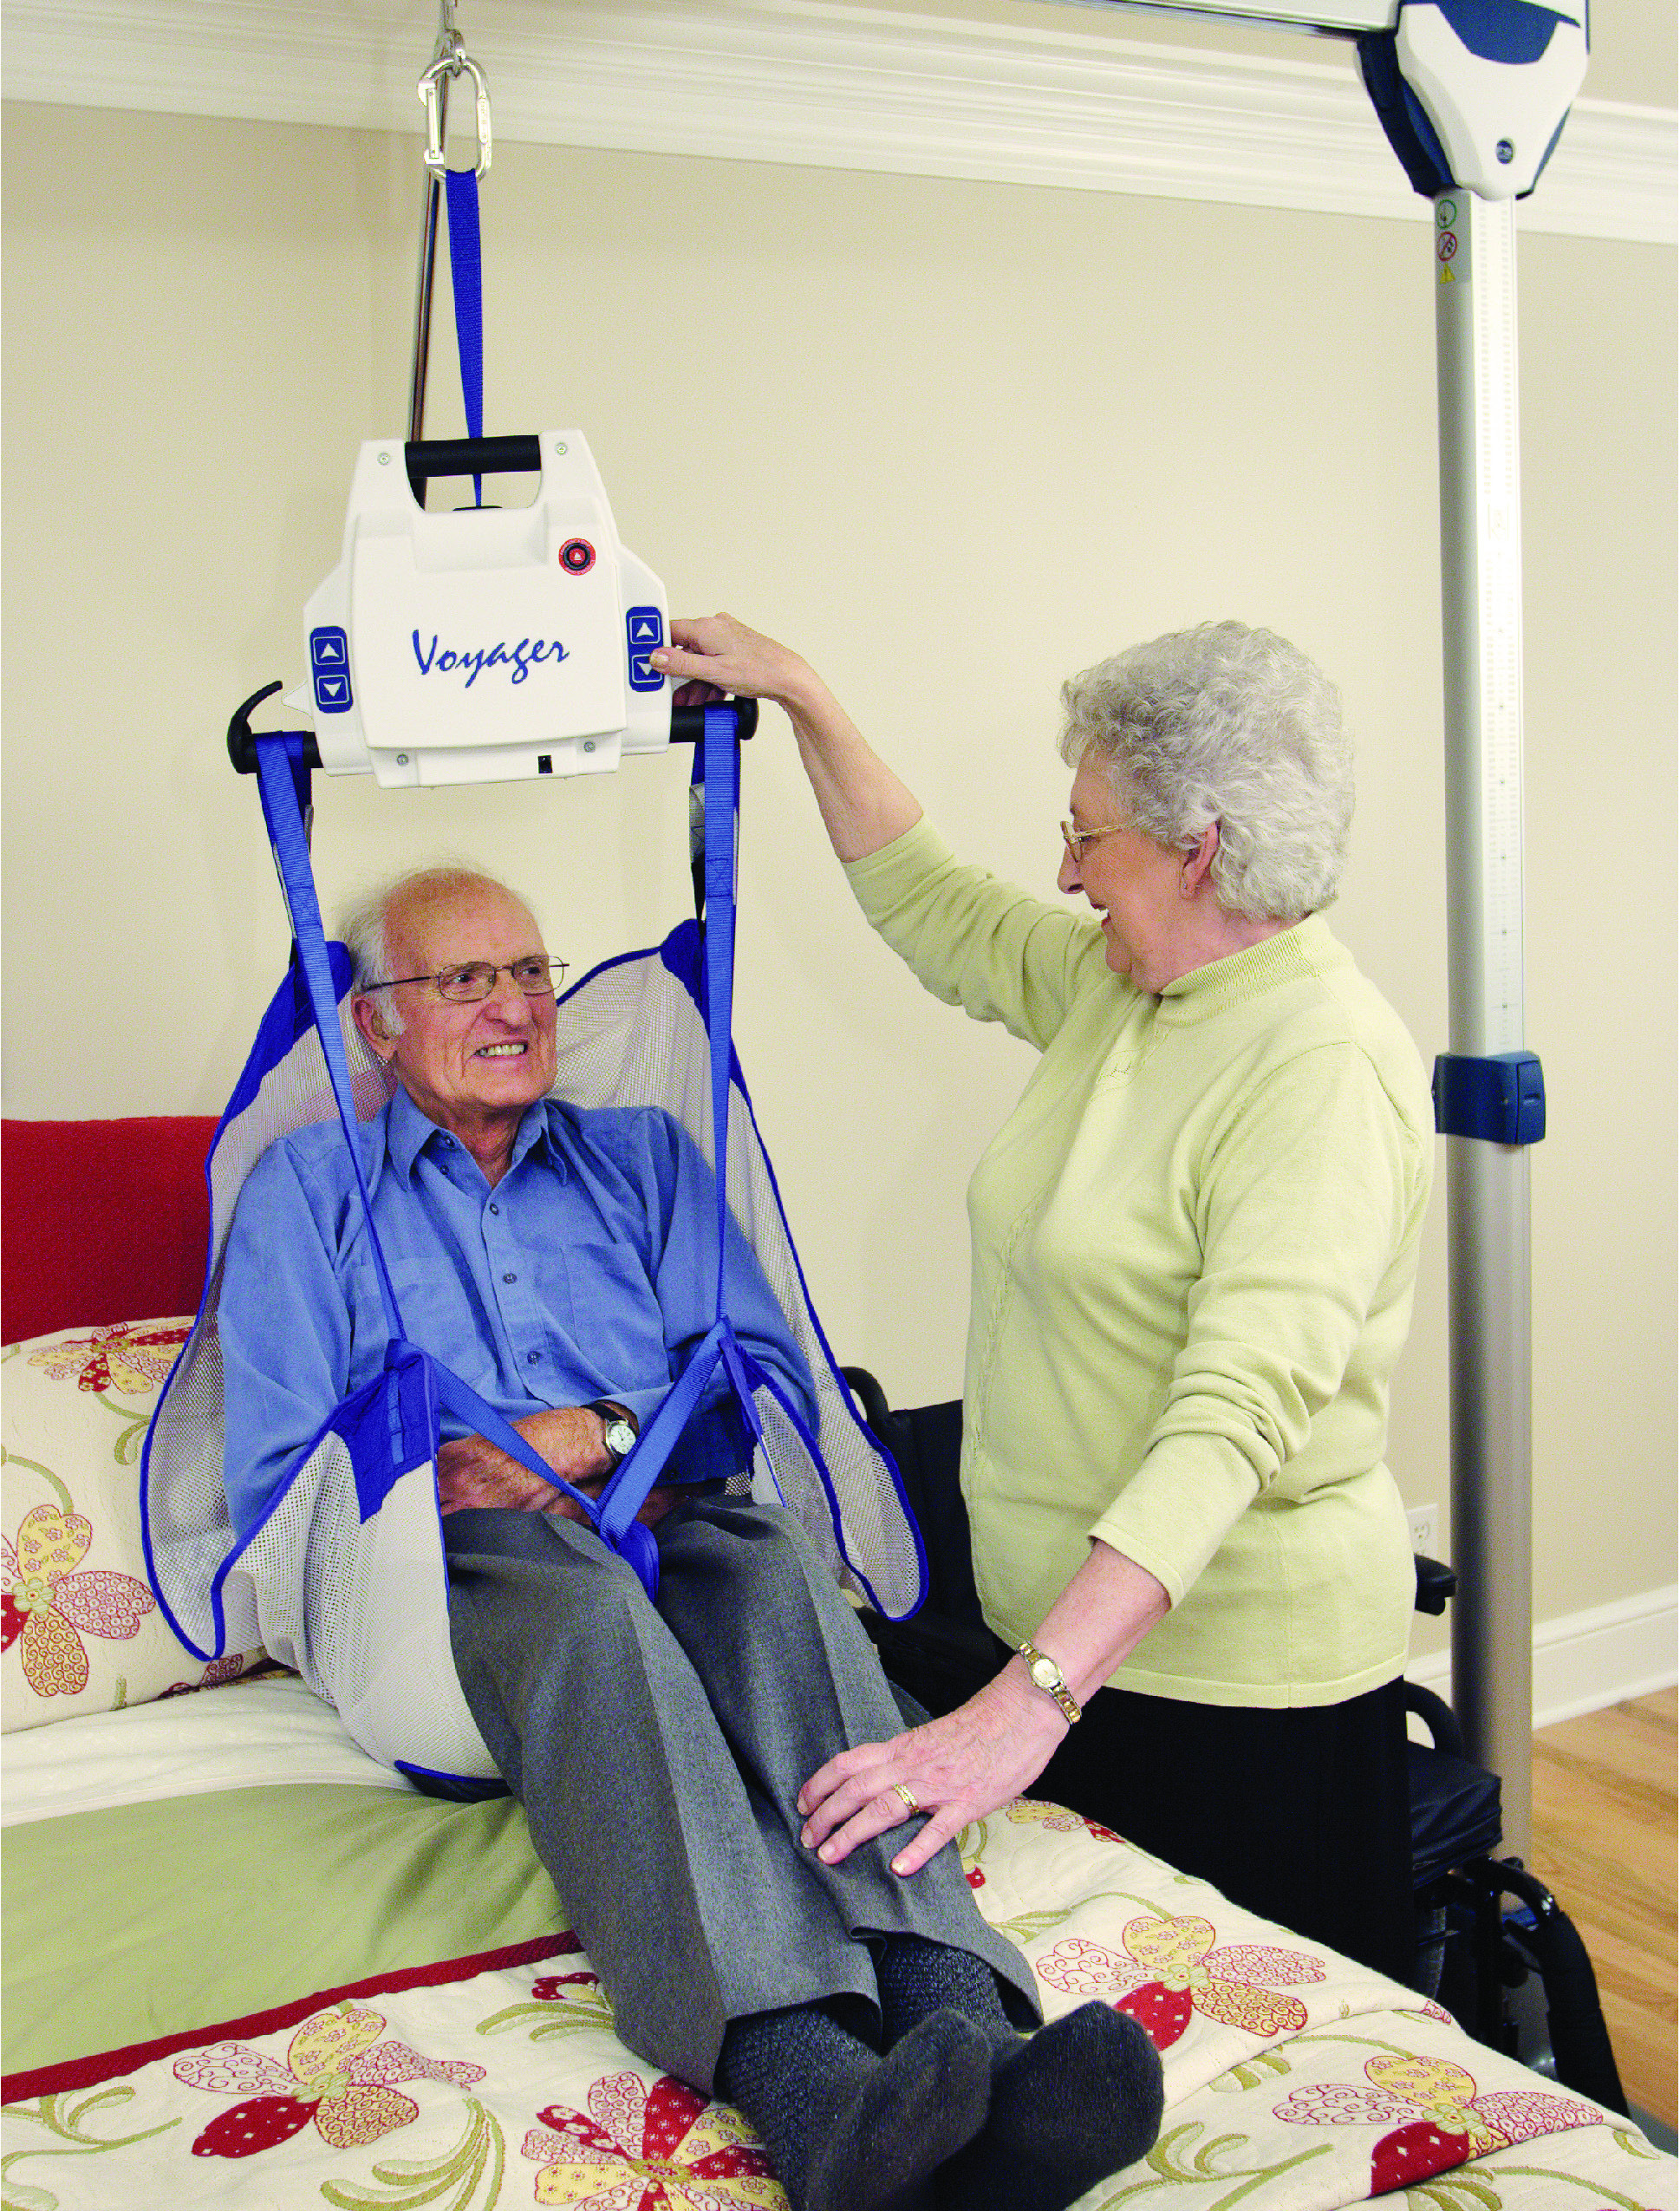 Voyager Easytrack Ceiling Lift System 1800wheelchair Com